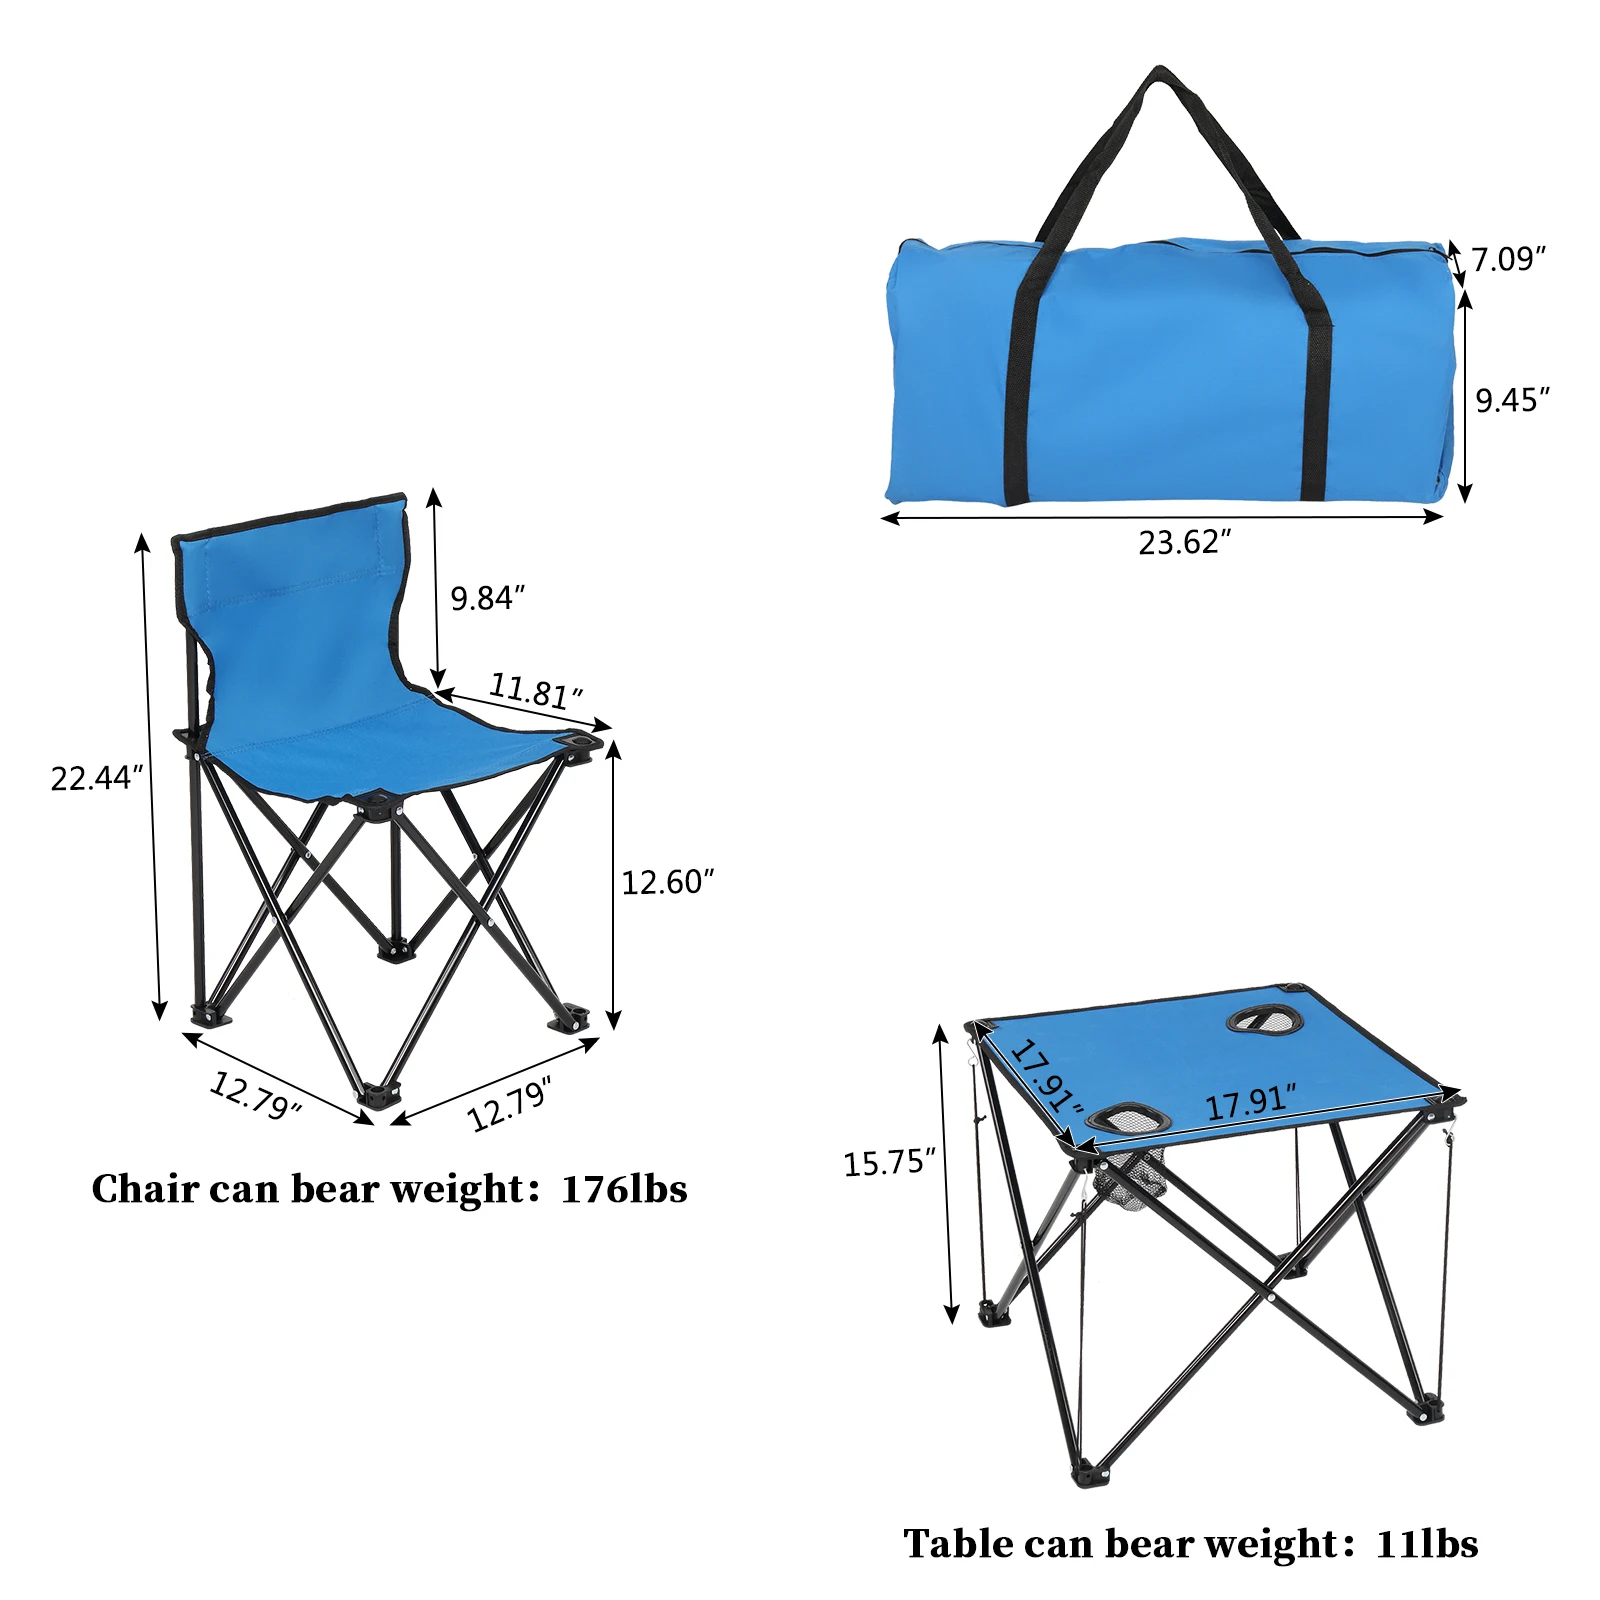 Portable Camping Folding Chair and Table Set Lightweight Outdoor Fishing Chairs Beach Moon For Relax Tourist Pool Garden Lounger enlarge